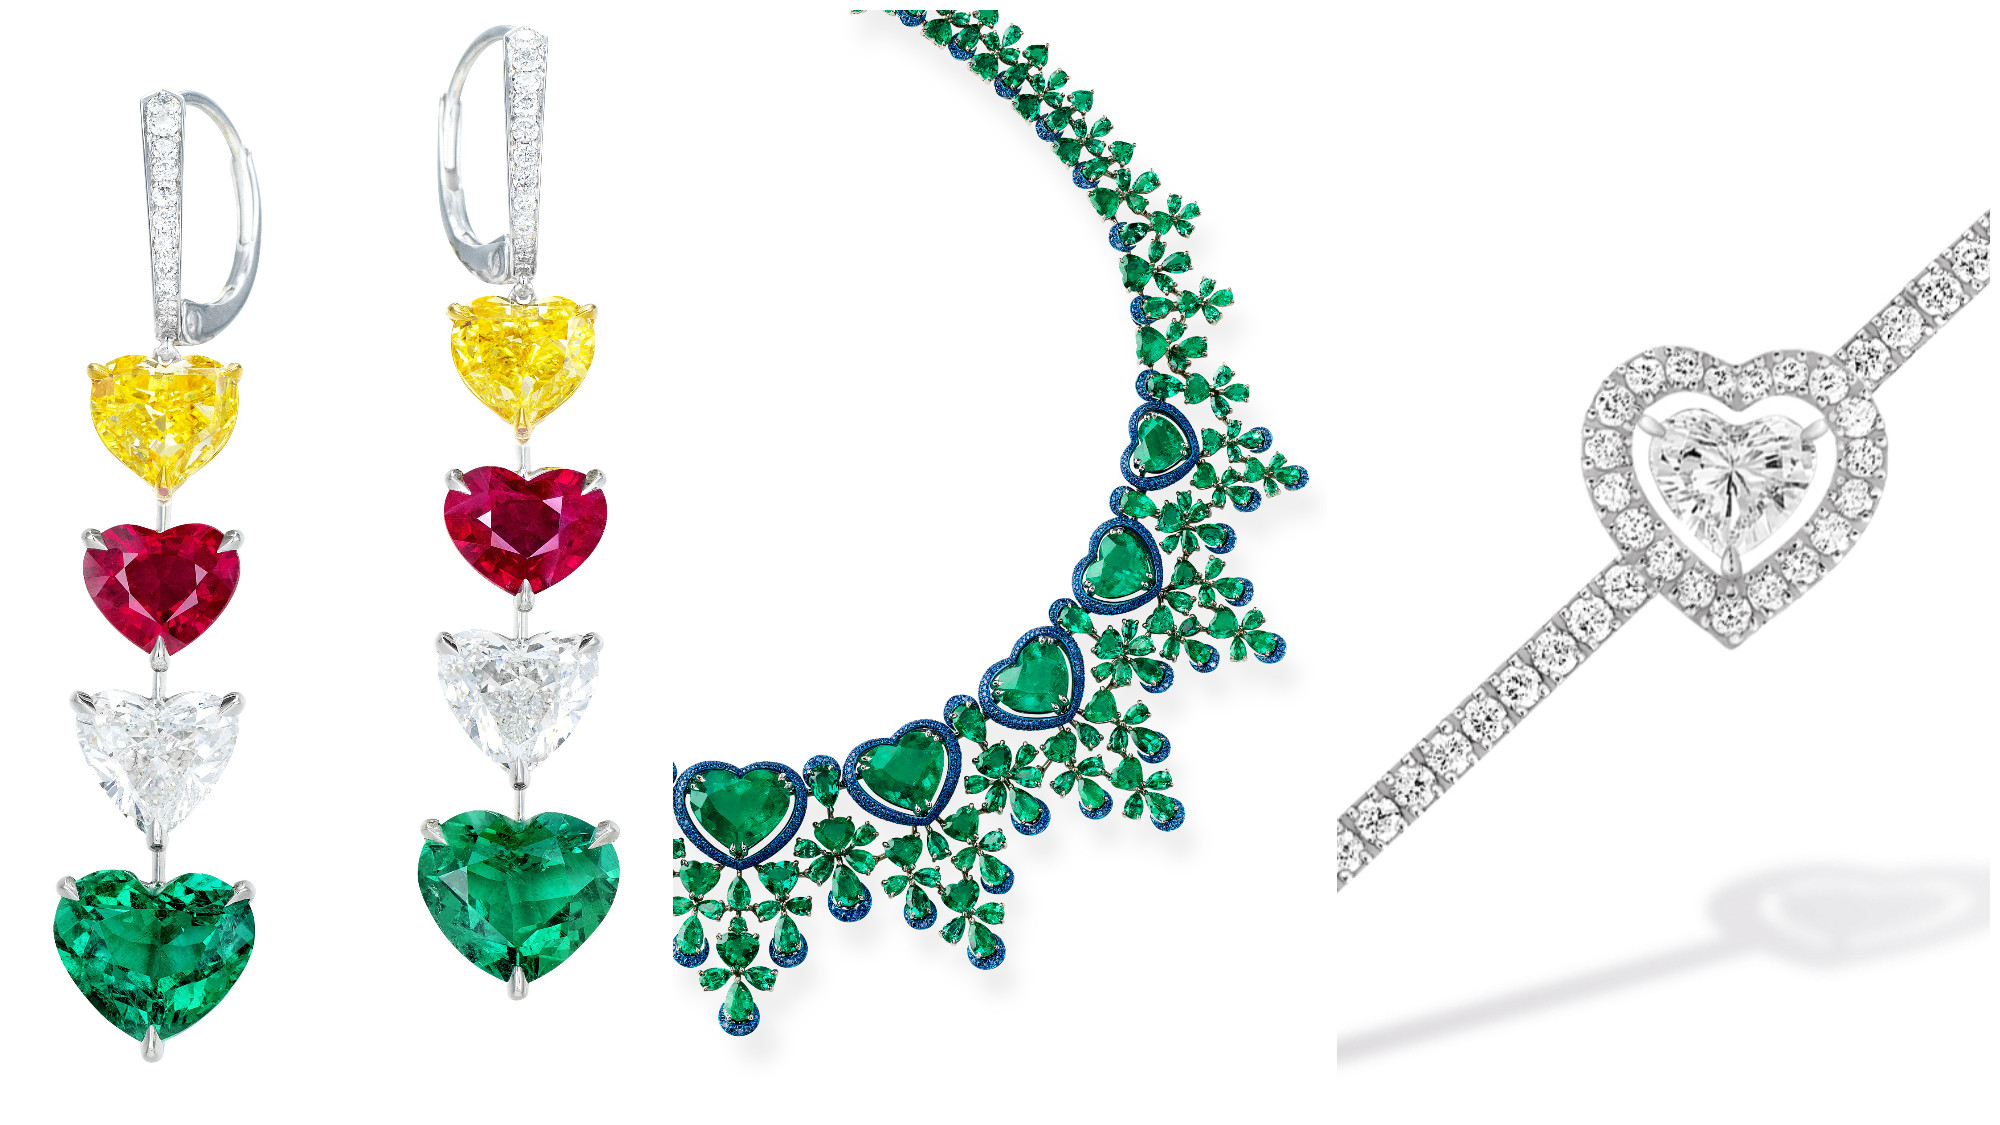 Ronald Abram 13.13 carat heart-shaped emerald, ruby, white and yellow diamond earrings; Chopard Red Carpet collection heart necklace; and Messika Joy Cœur 18-carat white-gold and pavé diamond earring. Photos: Handouts